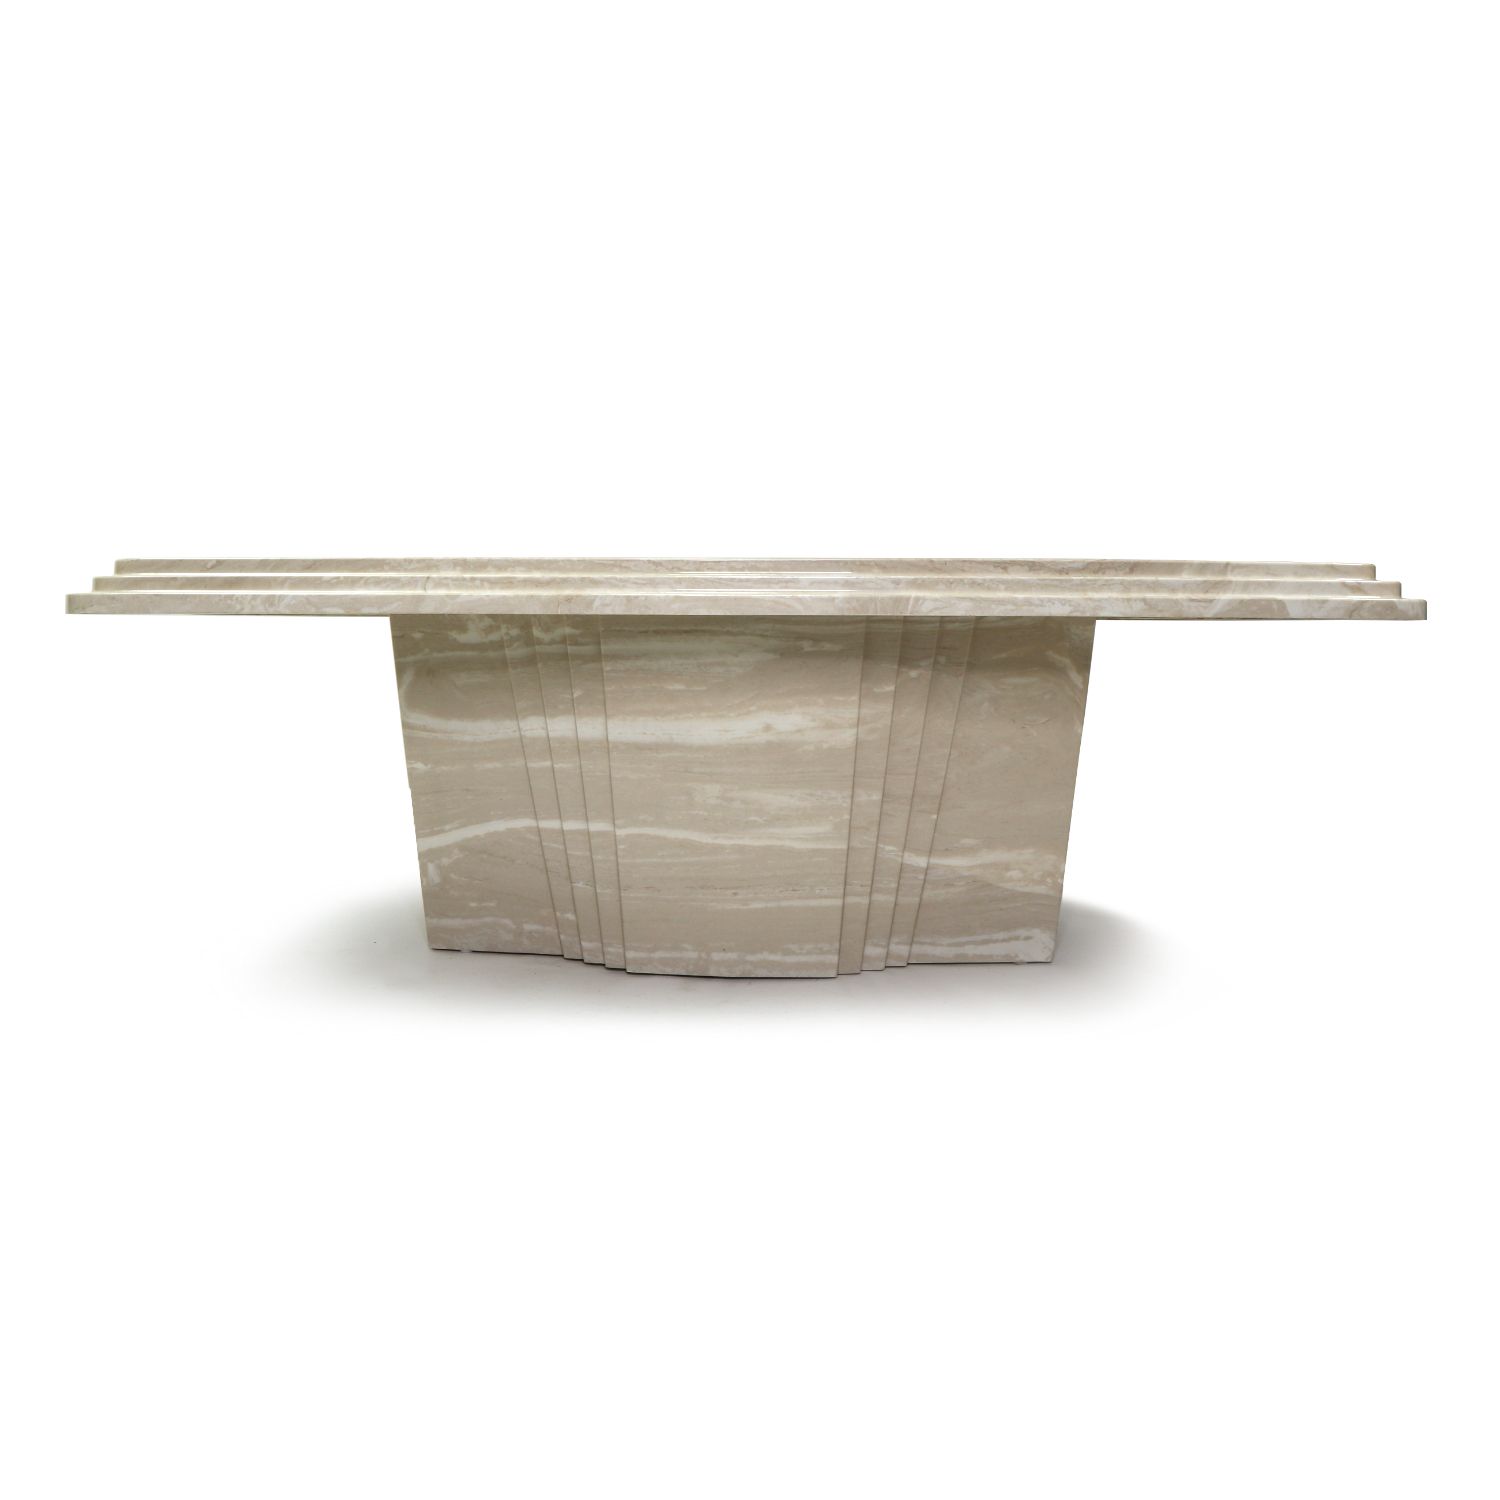 Well Known Deco Stone Coffee Tables Inside Vintage Art Deco Italian Travertine Stone Coffee Table (View 14 of 20)